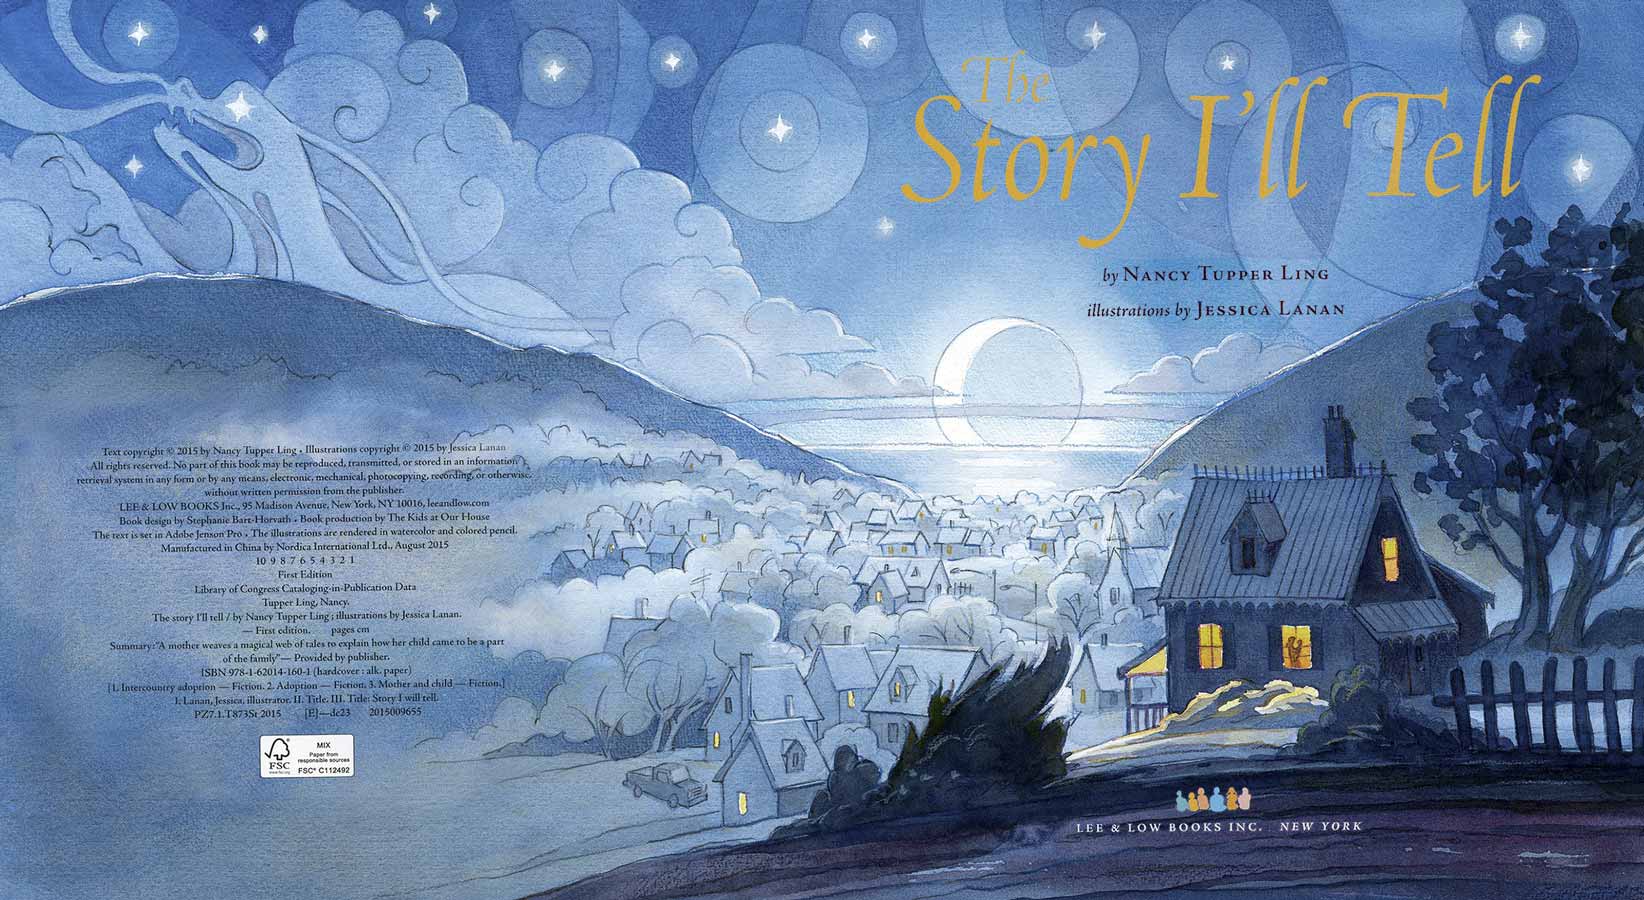 Watercolor illustration from the title page of The Story I'll Tell showing a house on a hillside with glowing lights overlooking a town in a valley and a night sky beyond full of stars and clouds forming the shape of a dragon.